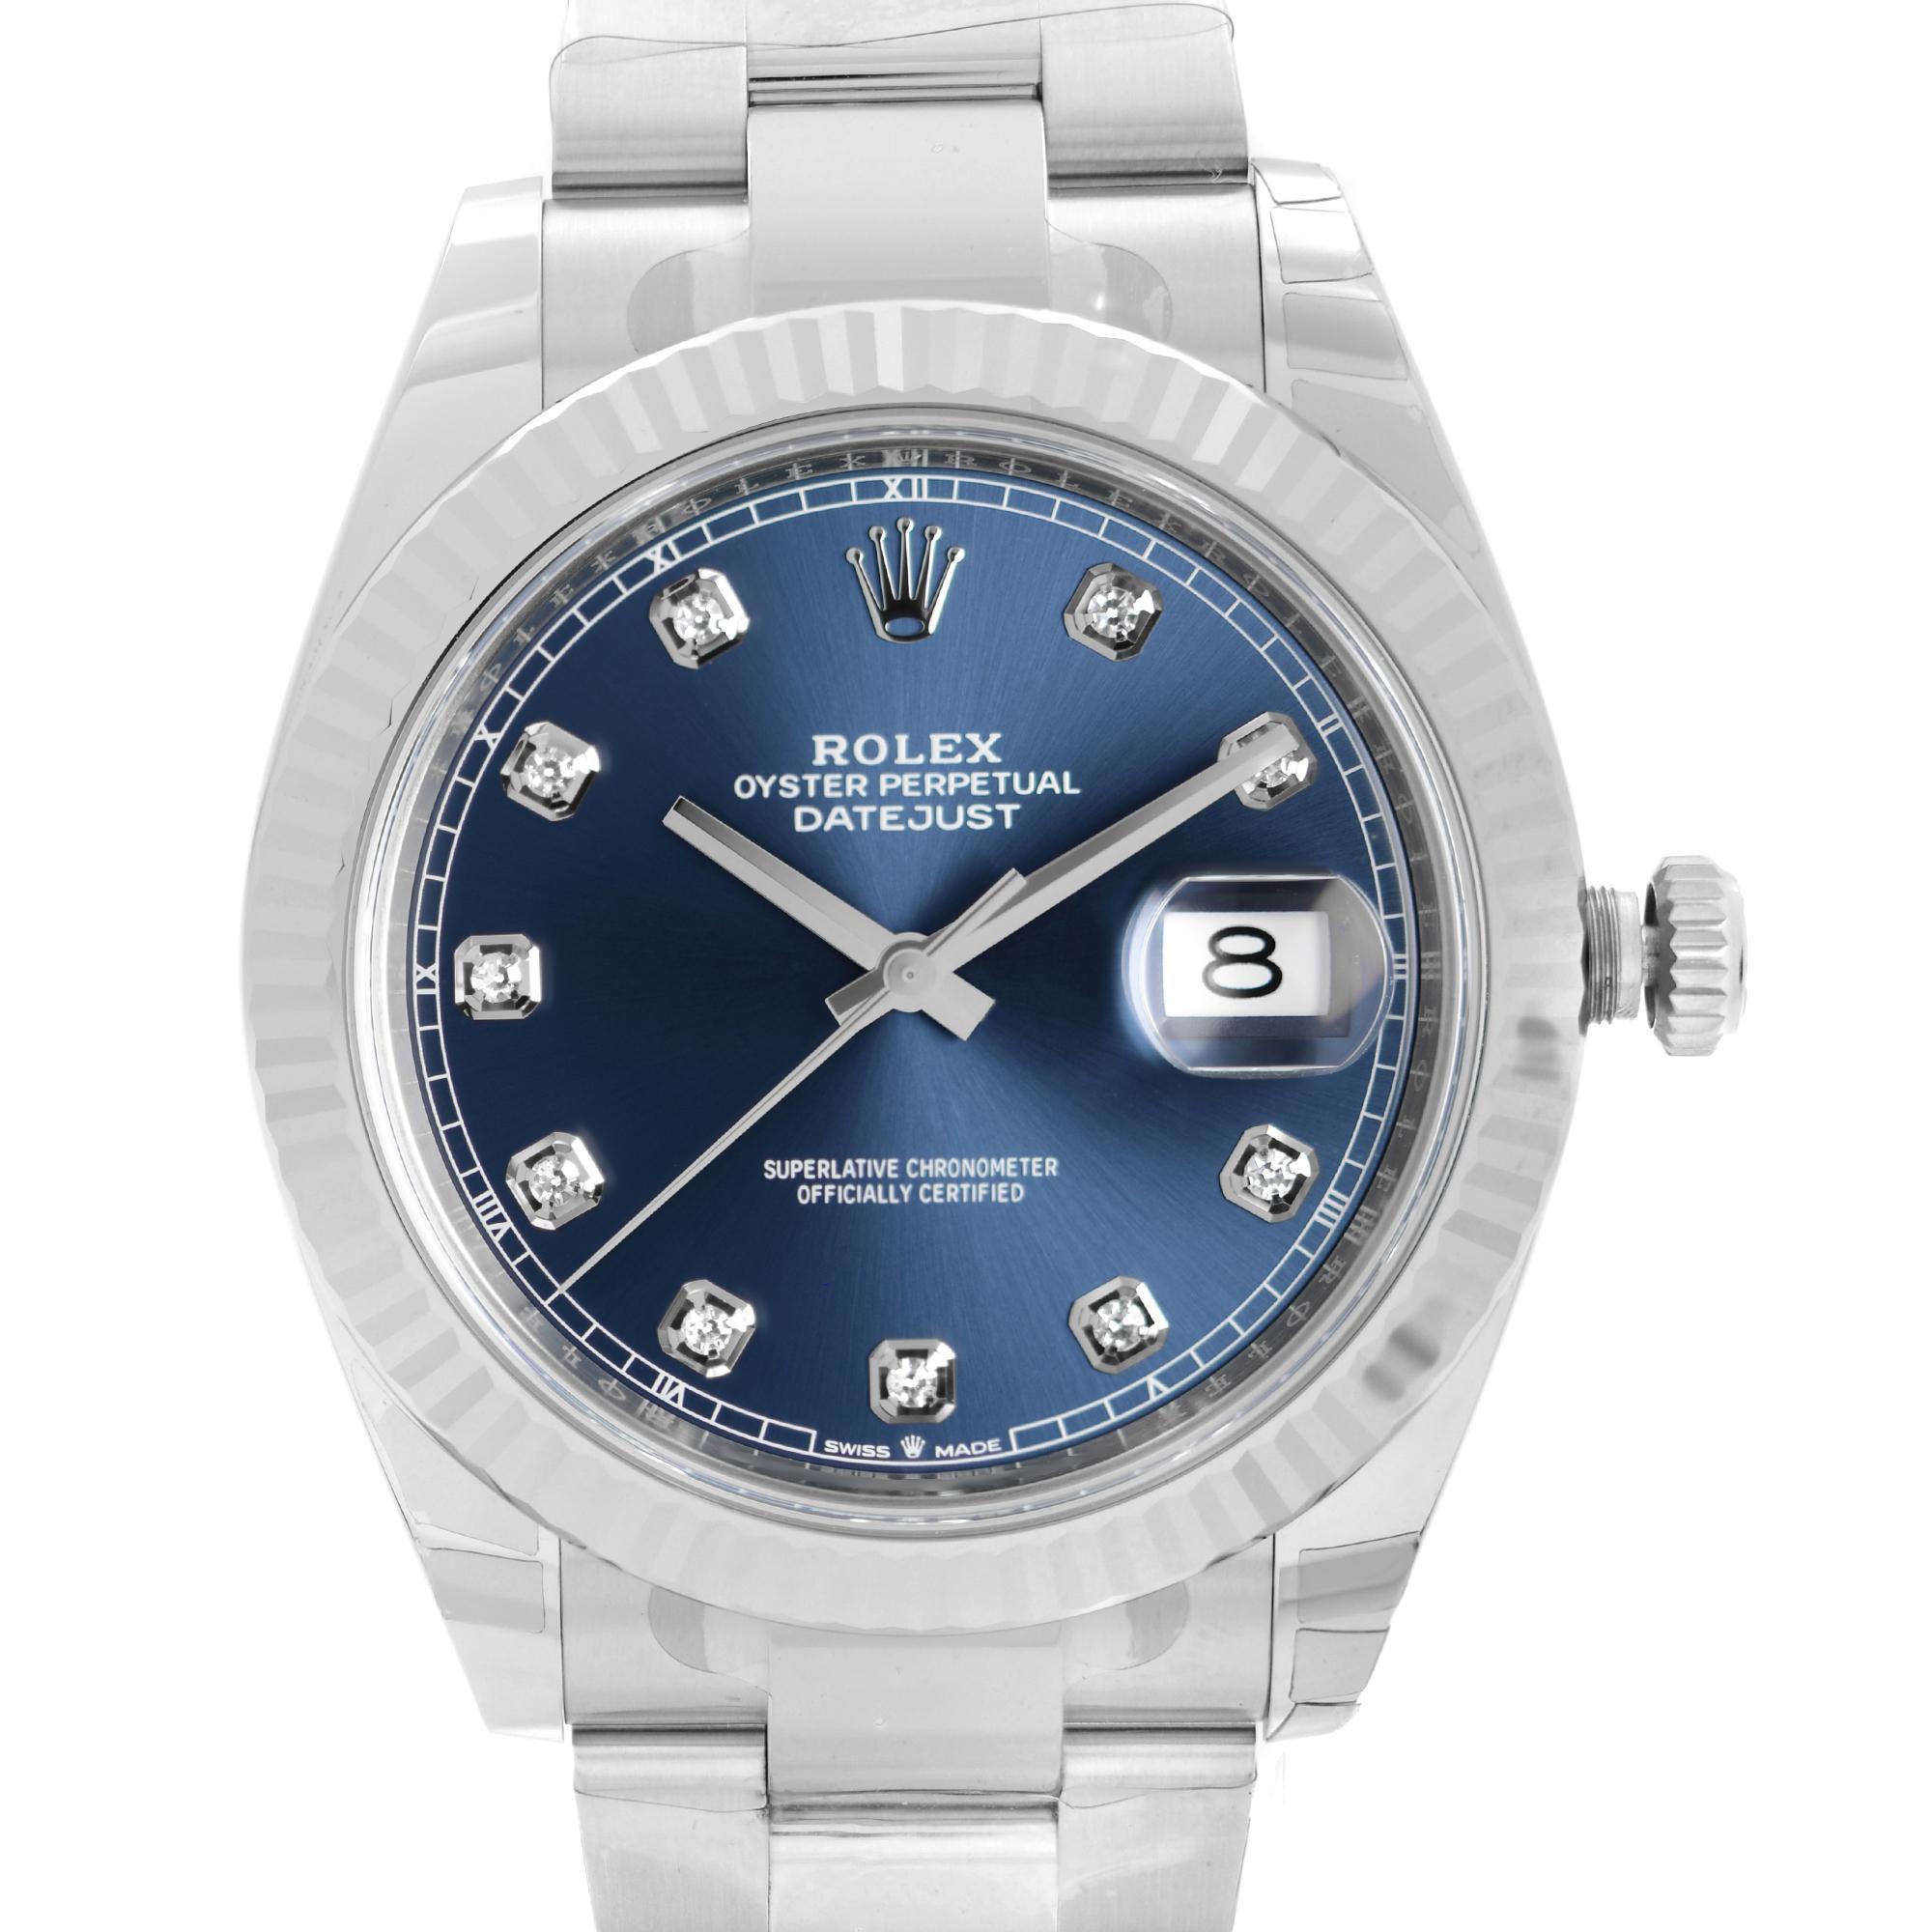 Display Model Rolex Datejust 41mm 18k White Gold Blue Diamond Dial Automatic Mens Watch 126334. This Beautiful Timepiece Come with a 2021 Card & is Powered by Mechanical (Automatic) Movement And Features: Round Stainless Steel Case With a Stainless